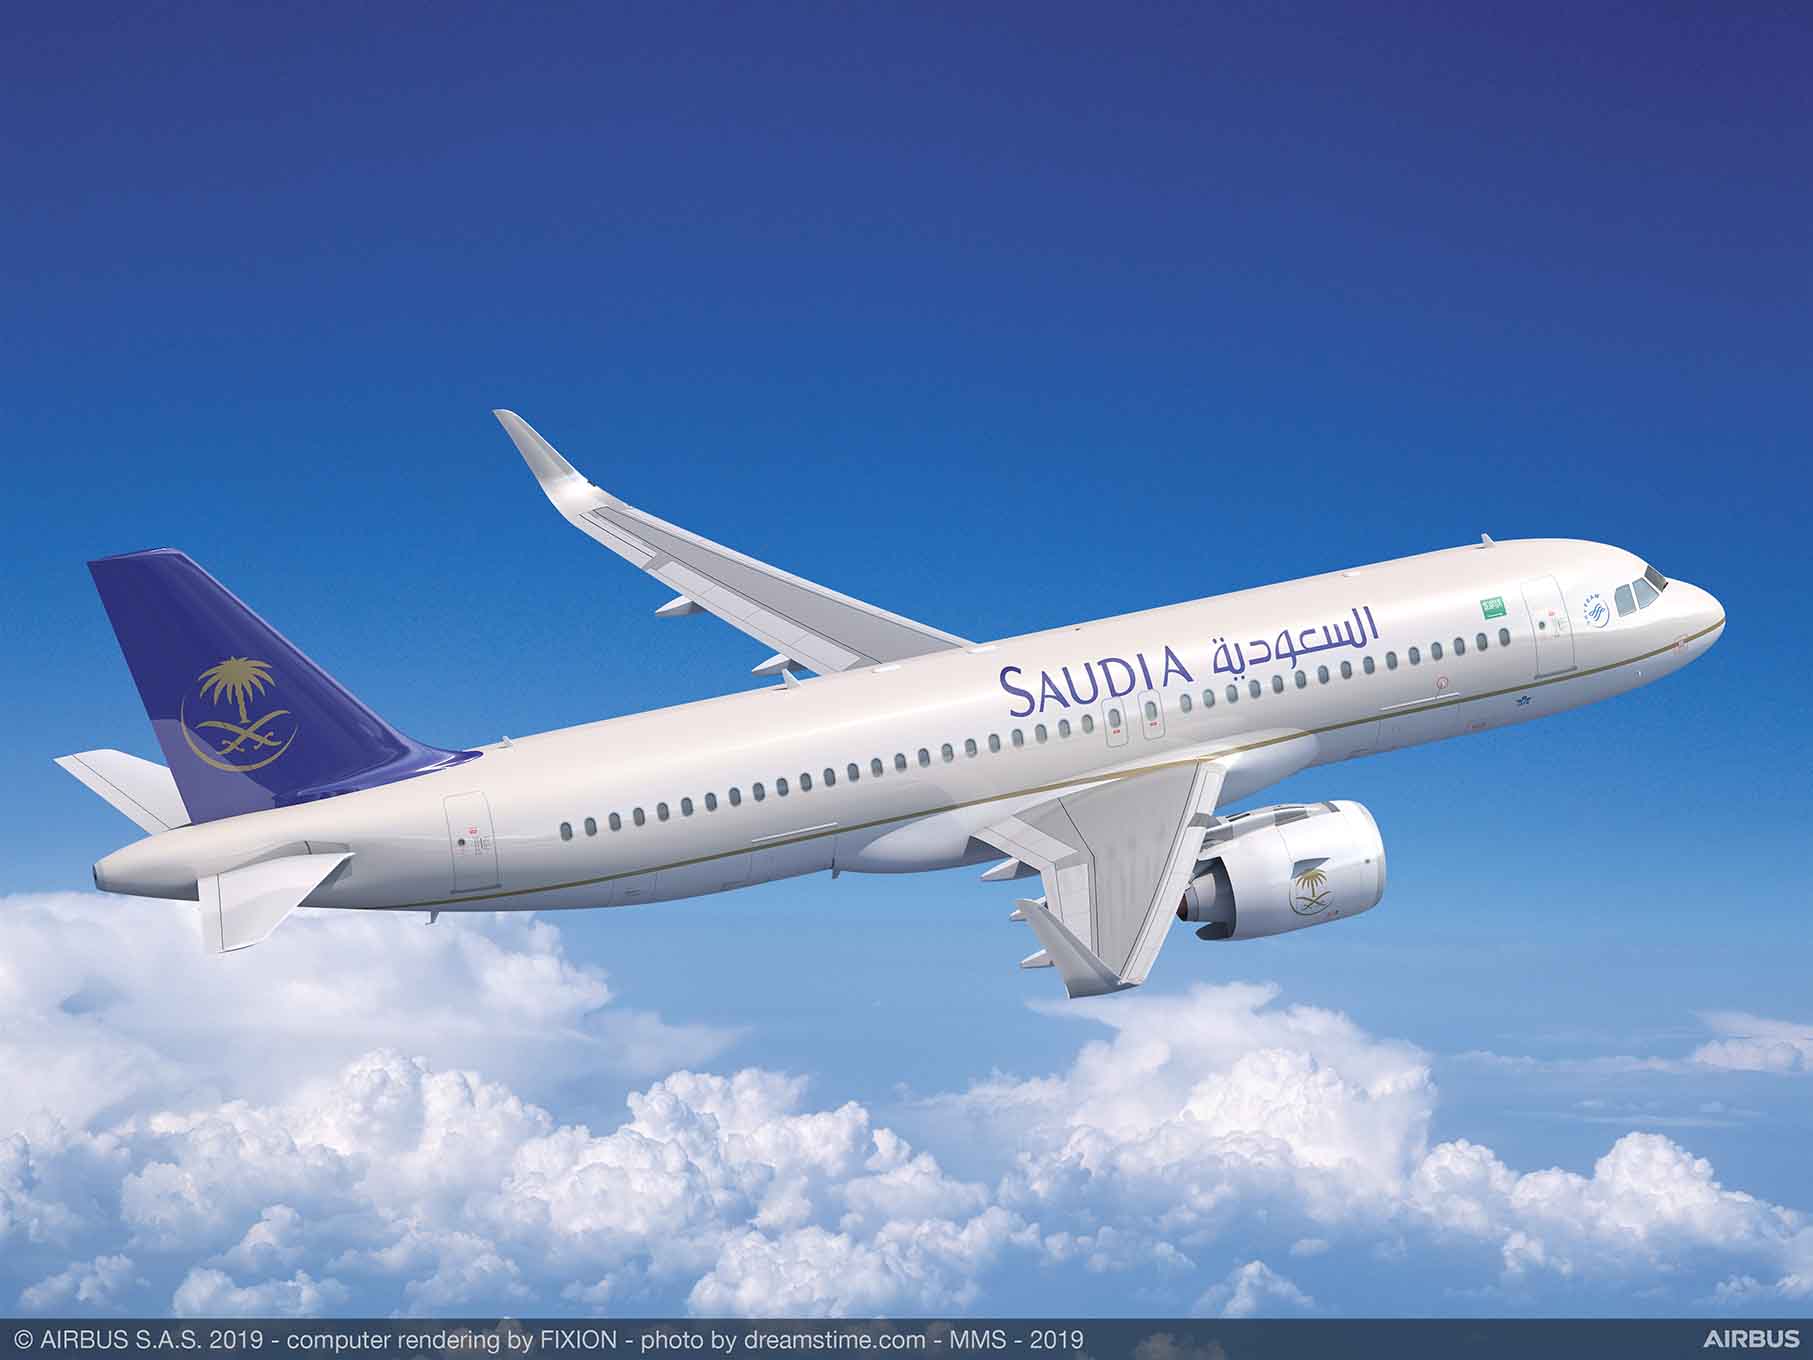 Saudi Arabian Airlines introduces influx of A320neo aircraft